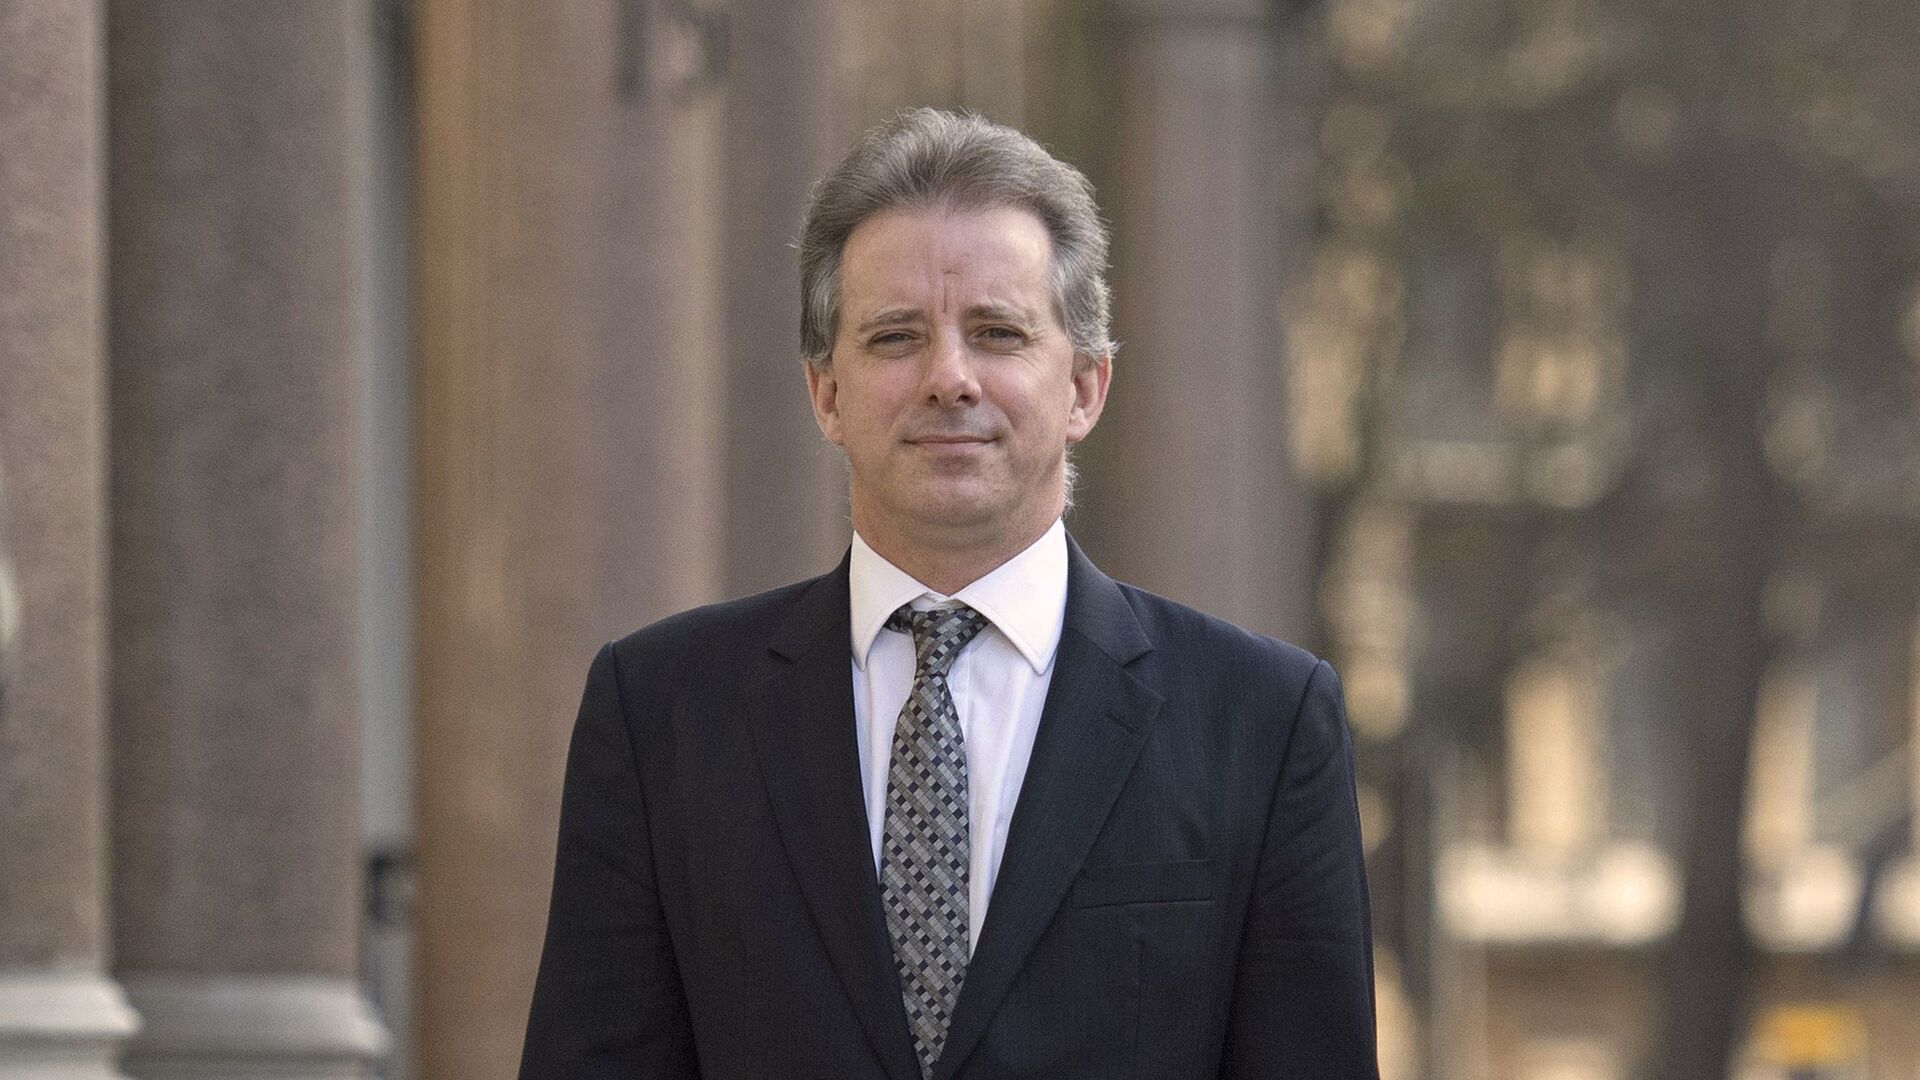 FILE - This Tuesday, March 7, 2017 file photo shows Christopher Steele, the former MI6 agent who set up Orbis Business Intelligence and compiled a dossier on Donald Trump, in London - Sputnik International, 1920, 09.11.2021